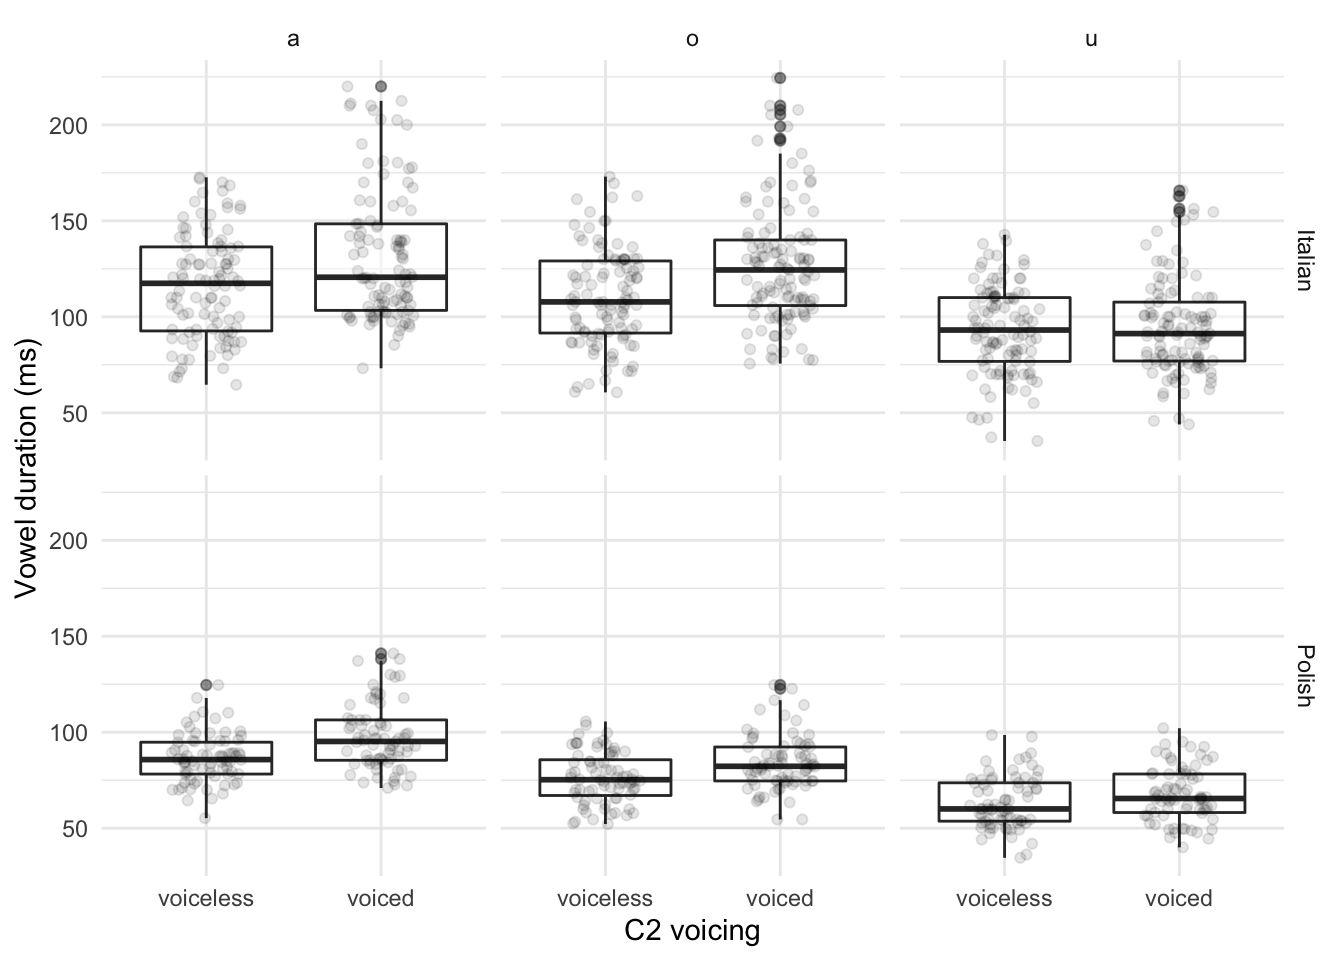 Raw data and boxplots of the duration in milliseconds of vowels in Italian (top row) and Polish (bottom row), for the vowels /a, o, u/ when followed by a voiceless or voiced stop.